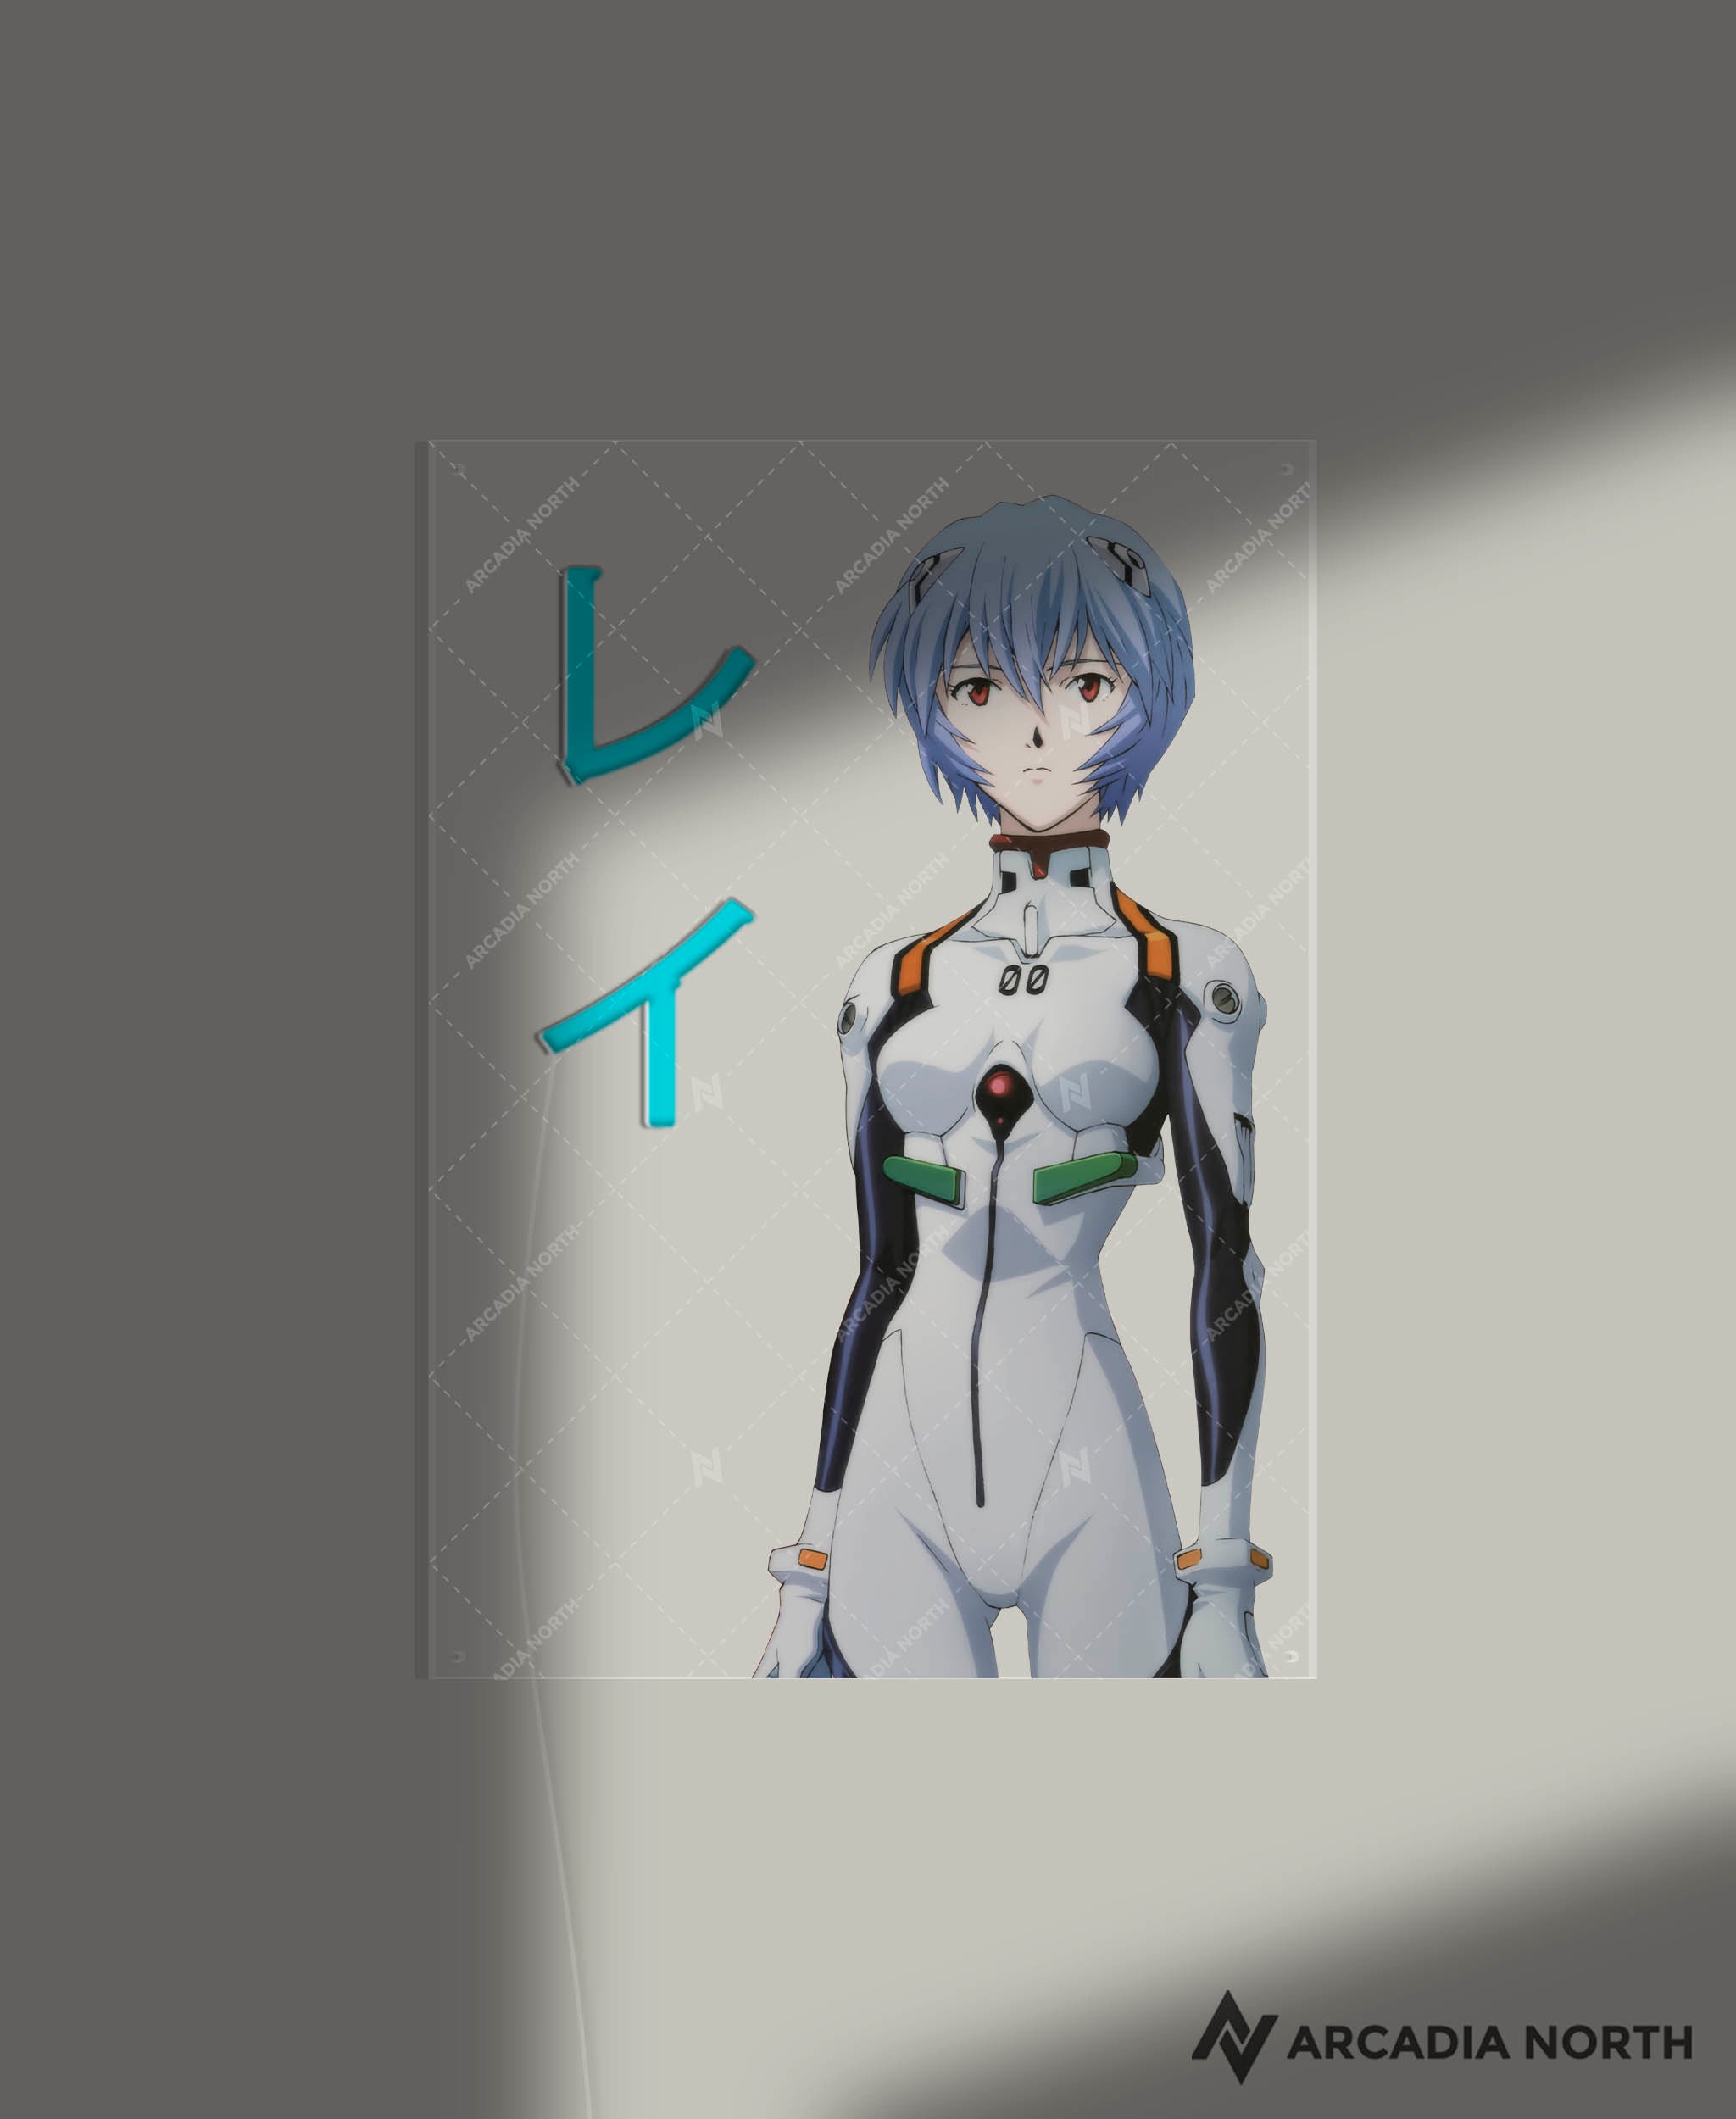 Arcadia North AURALIGHT - an LED Poster featuring the anime Neon Genesis Evangelion with Rei Ayanami and her name Rei in Japanese Katakana illuminated by glowing neon LED lights. UV-printed on acrylic.